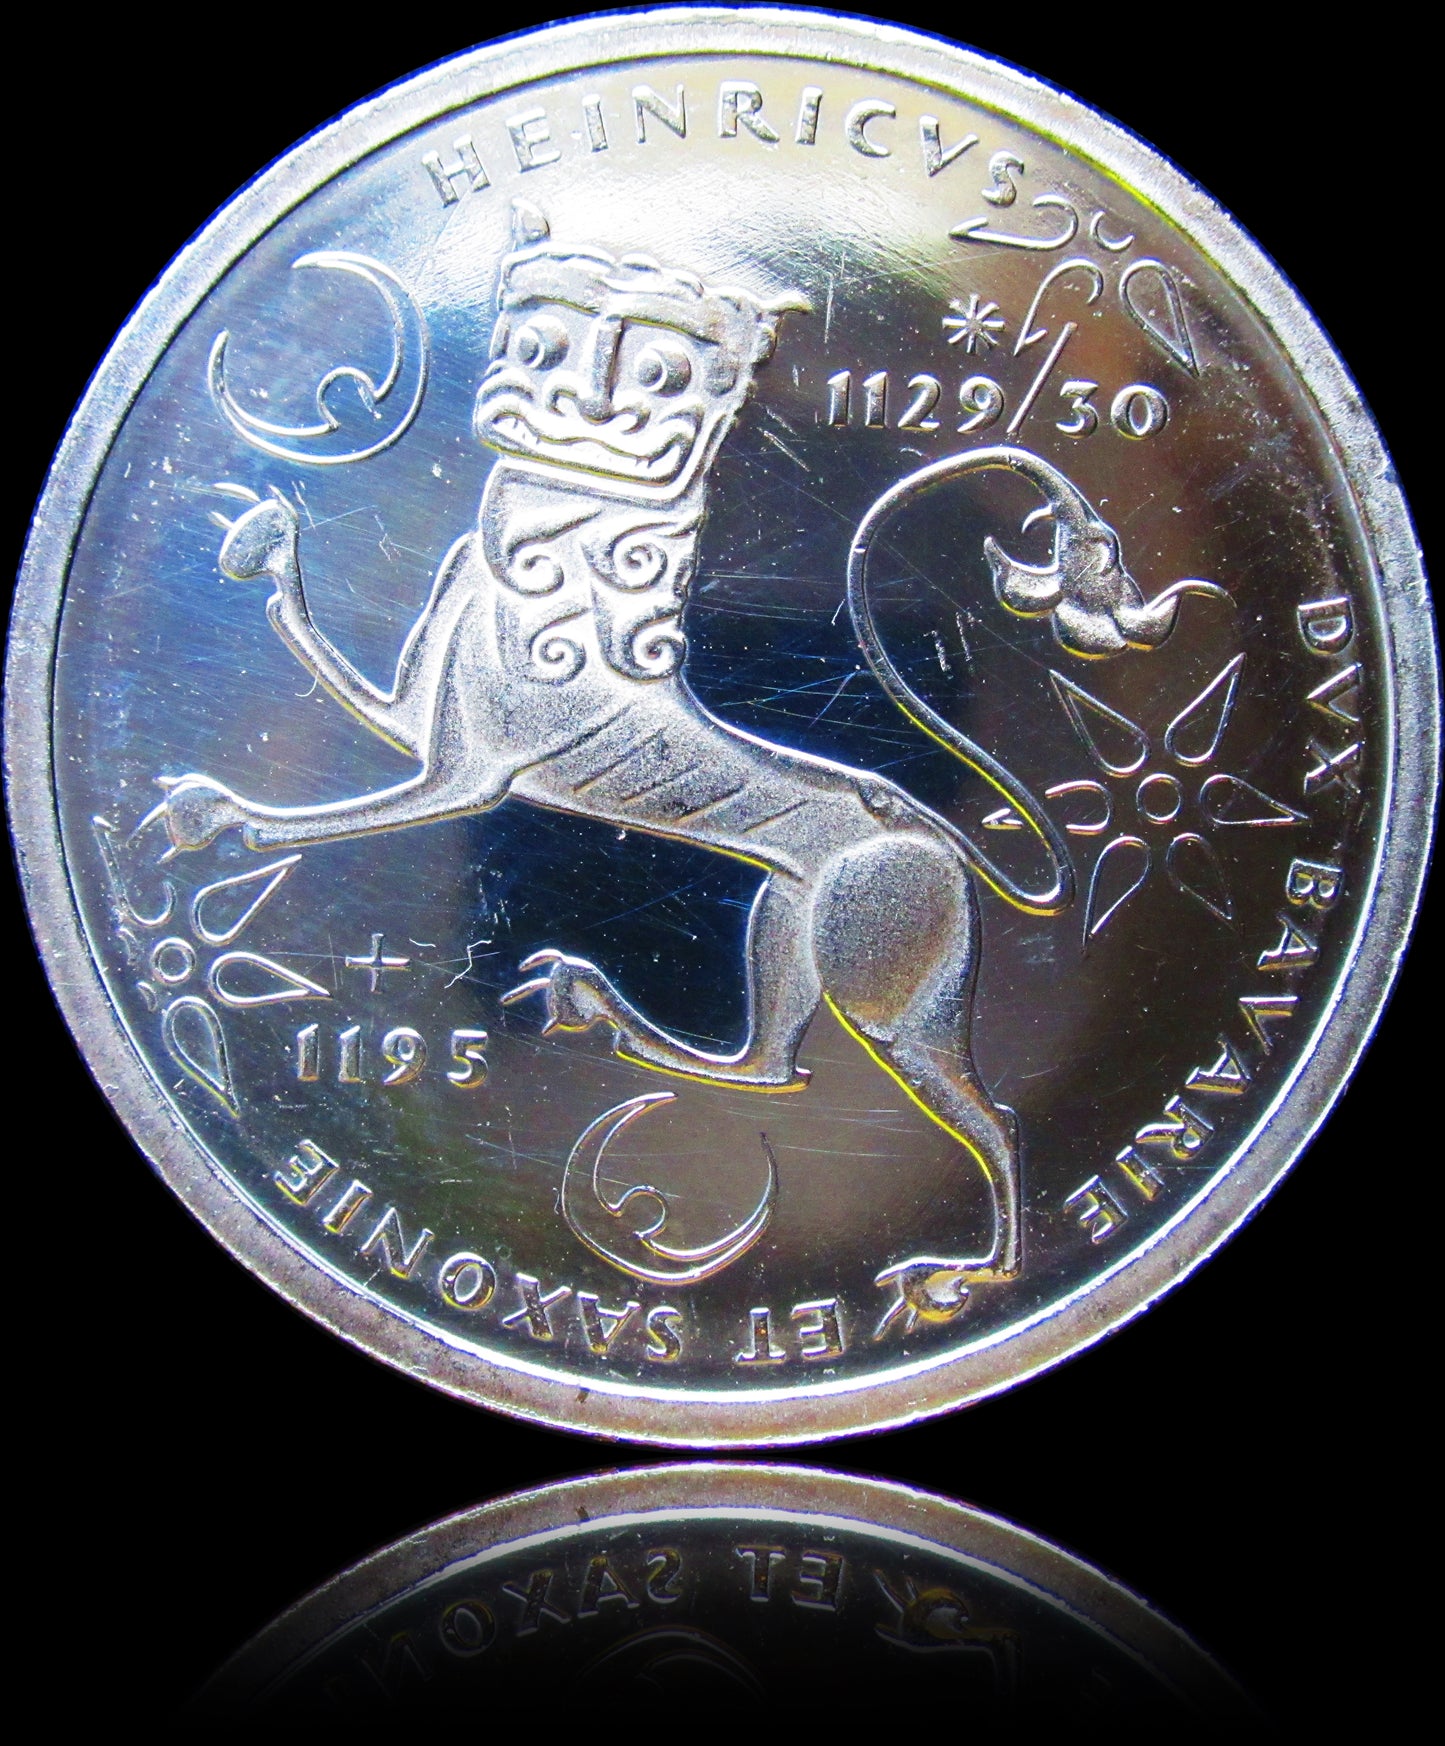 HENRY THE LION, series 10 DM silver coin, 1995